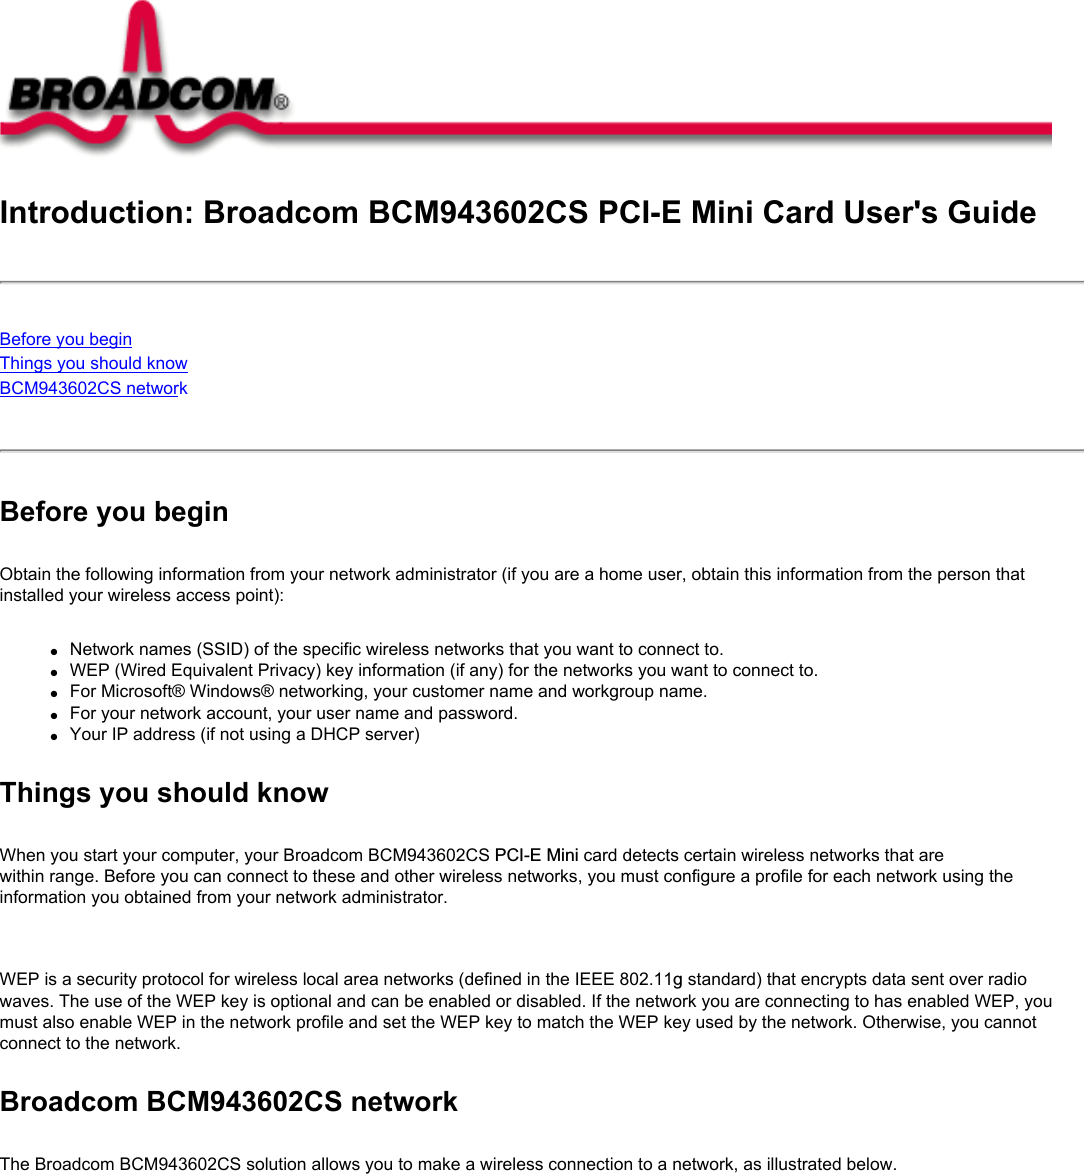 Introduction: Broadcom BCM943602CS PCI-E Mini Card User&apos;s GuideBefore you beginThings you should knowBCM943602CS network Before you beginObtain the following information from your network administrator (if you are a home user, obtain this information from the person that installed your wireless access point):●     Network names (SSID) of the specific wireless networks that you want to connect to.●     WEP (Wired Equivalent Privacy) key information (if any) for the networks you want to connect to.●     For Microsoft® Windows® networking, your customer name and workgroup name.●     For your network account, your user name and password.●     Your IP address (if not using a DHCP server)Things you should knowWhen you start your computer, your Broadcom BCM943602CS PCI-E Mini card detects certain wireless networks that are within range. Before you can connect to these and other wireless networks, you must configure a profile for each network using the information you obtained from your network administrator.   WEP is a security protocol for wireless local area networks (defined in the IEEE 802.11g standard) that encrypts data sent over radio waves. The use of the WEP key is optional and can be enabled or disabled. If the network you are connecting to has enabled WEP, you must also enable WEP in the network profile and set the WEP key to match the WEP key used by the network. Otherwise, you cannot connect to the network.Broadcom BCM943602CS networkThe Broadcom BCM943602CS solution allows you to make a wireless connection to a network, as illustrated below.